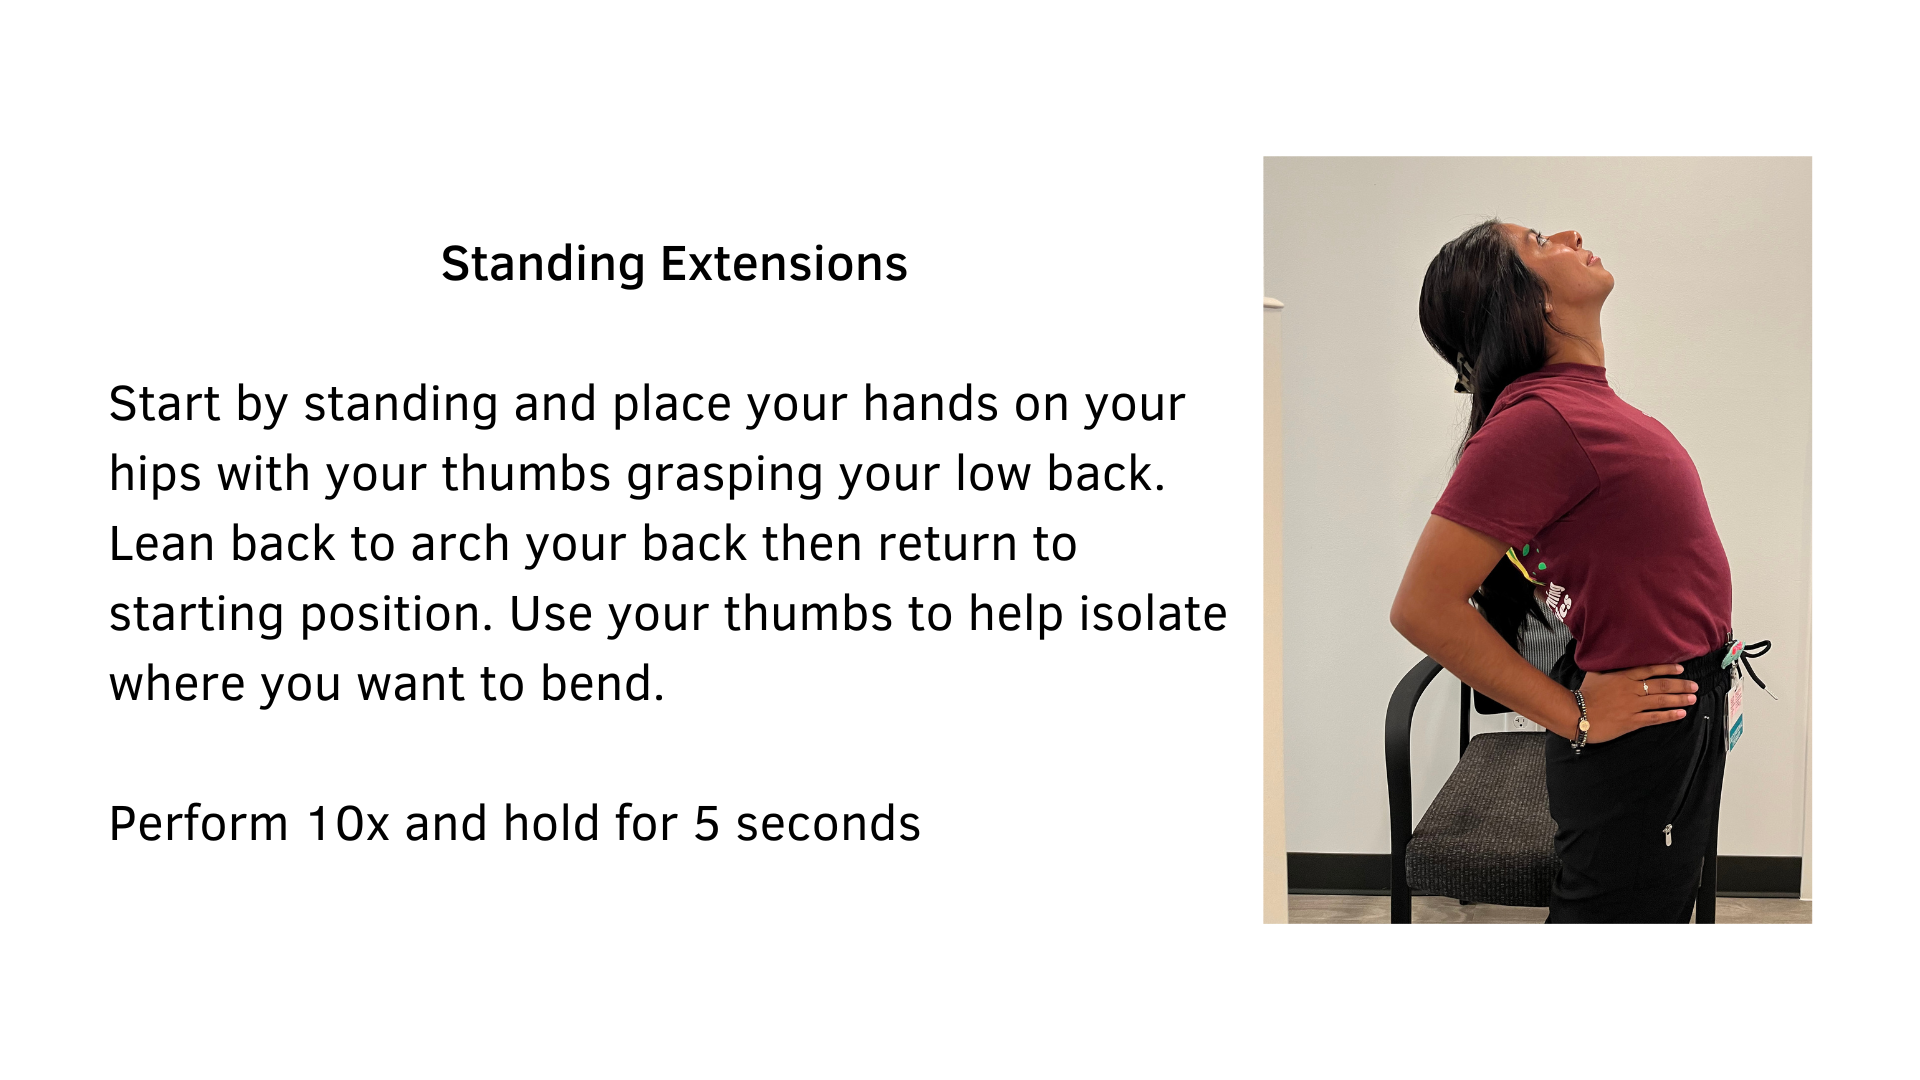 Black text on a white background that reads, "Standing Extensions: Start by standing and place your hands on your hips with your thumbs grasping your low back. Lean back to arch your back then return to starting position. Use your thumbs to help isolate where you want to bend. Perform 10x and hold for 5 seconds". A picture of a woman performing the stretch is featured.